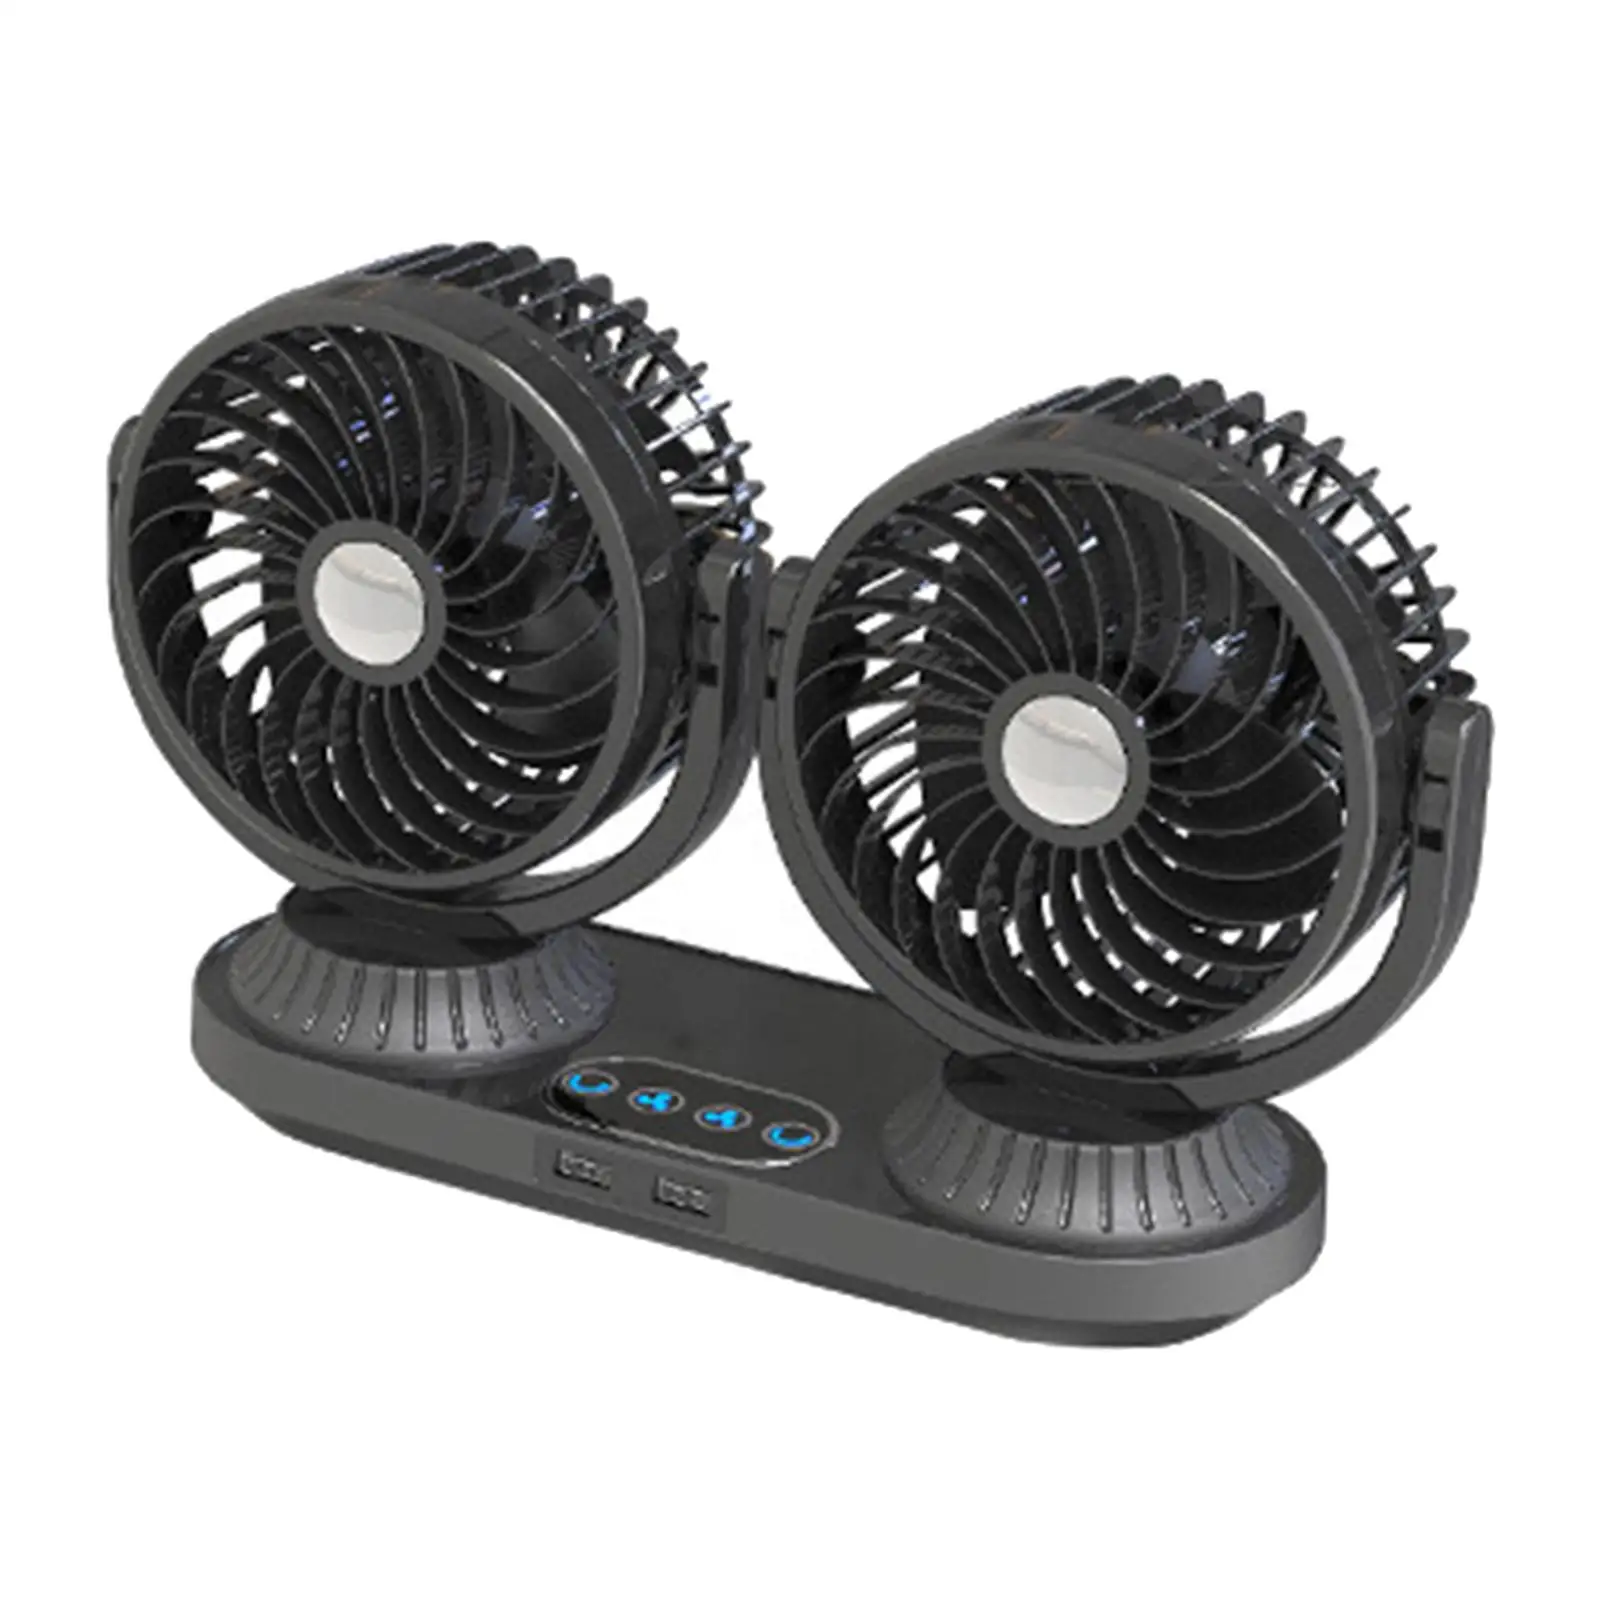 Dual Heads Car Fan for 12V 24V Vehicles 180 up and Down Adjustment Truck Fan